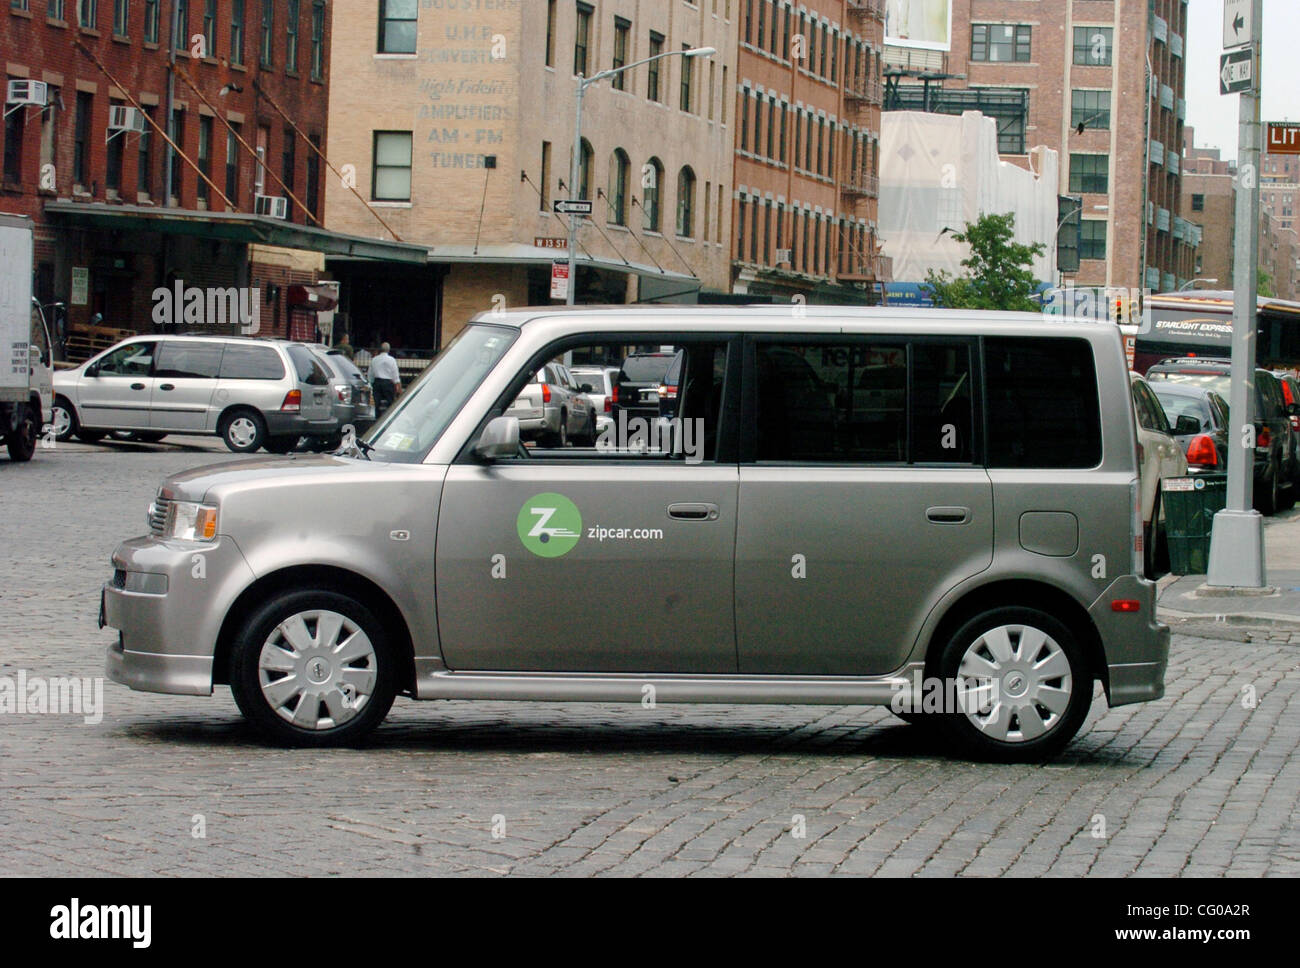 A Toyota Scion, available through Zipcar. Zipcar provides cars parked off-street throughout U.S. and Canadian cities available for use by members for any length of time on a timeshare basis. Stock Photo